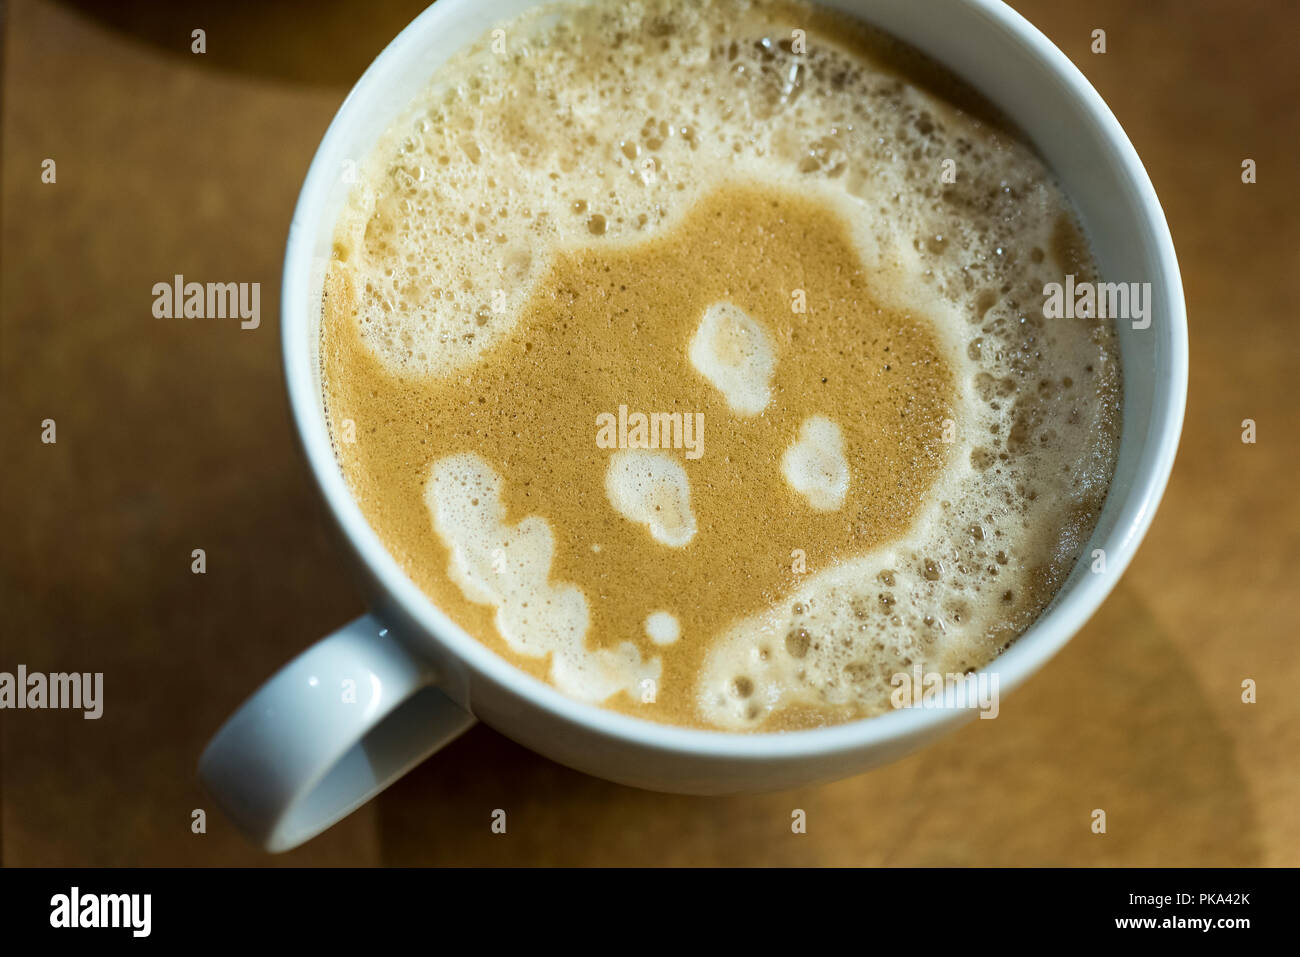 A face with curly hair is formed by the bubbles in the foam of a latte. Stock Photo